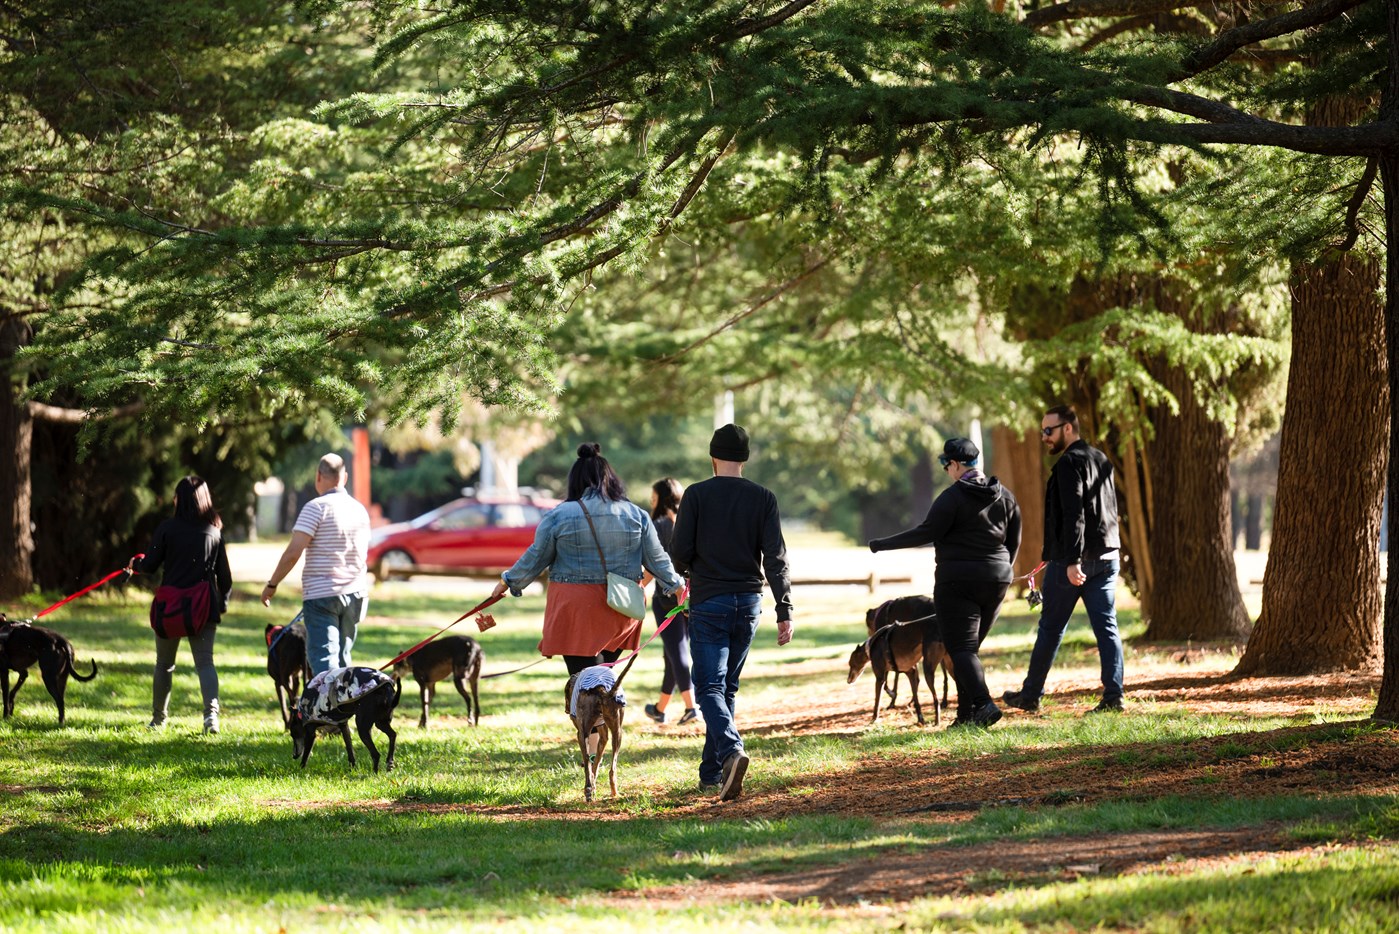 6 people walk 7 dogs on lead through pine trees and grassy areas with sun shining through at Haig Park Canberra 